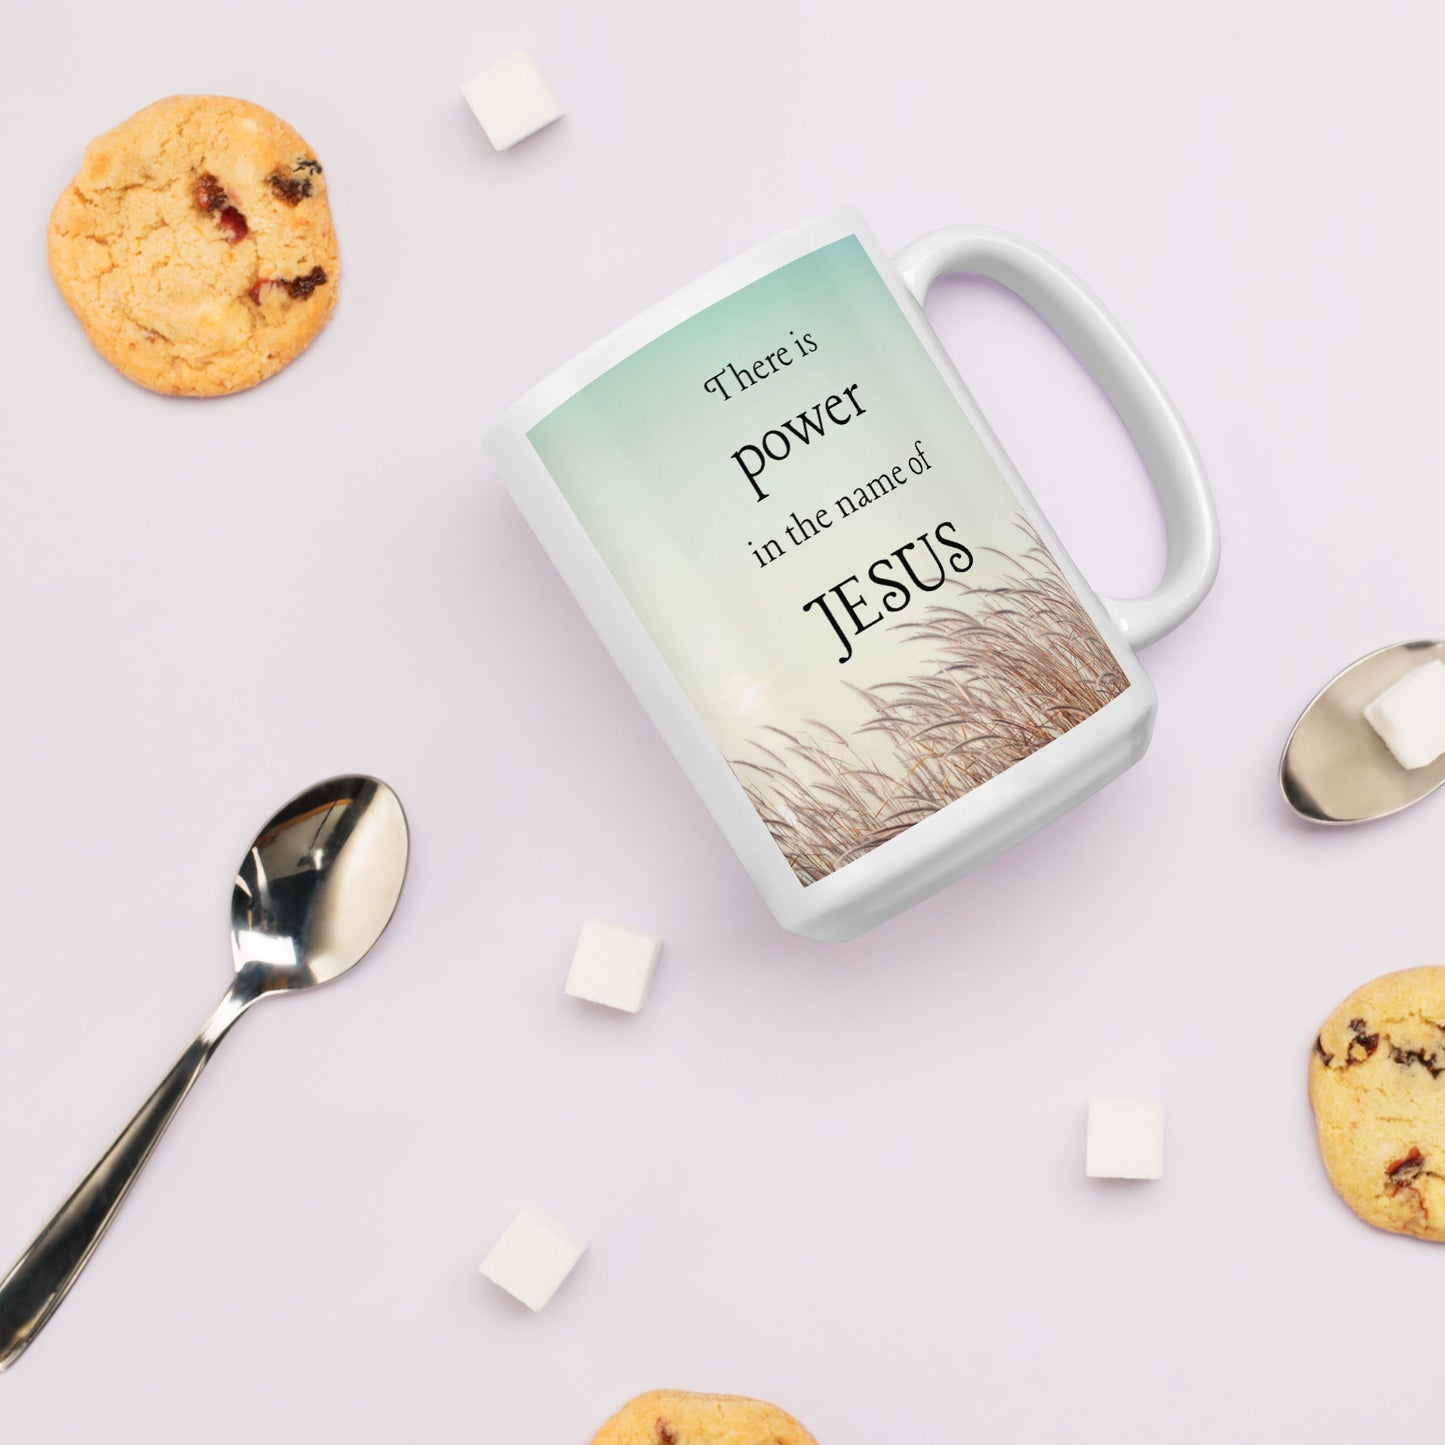 There is power in the name of Jesus White glossy mug